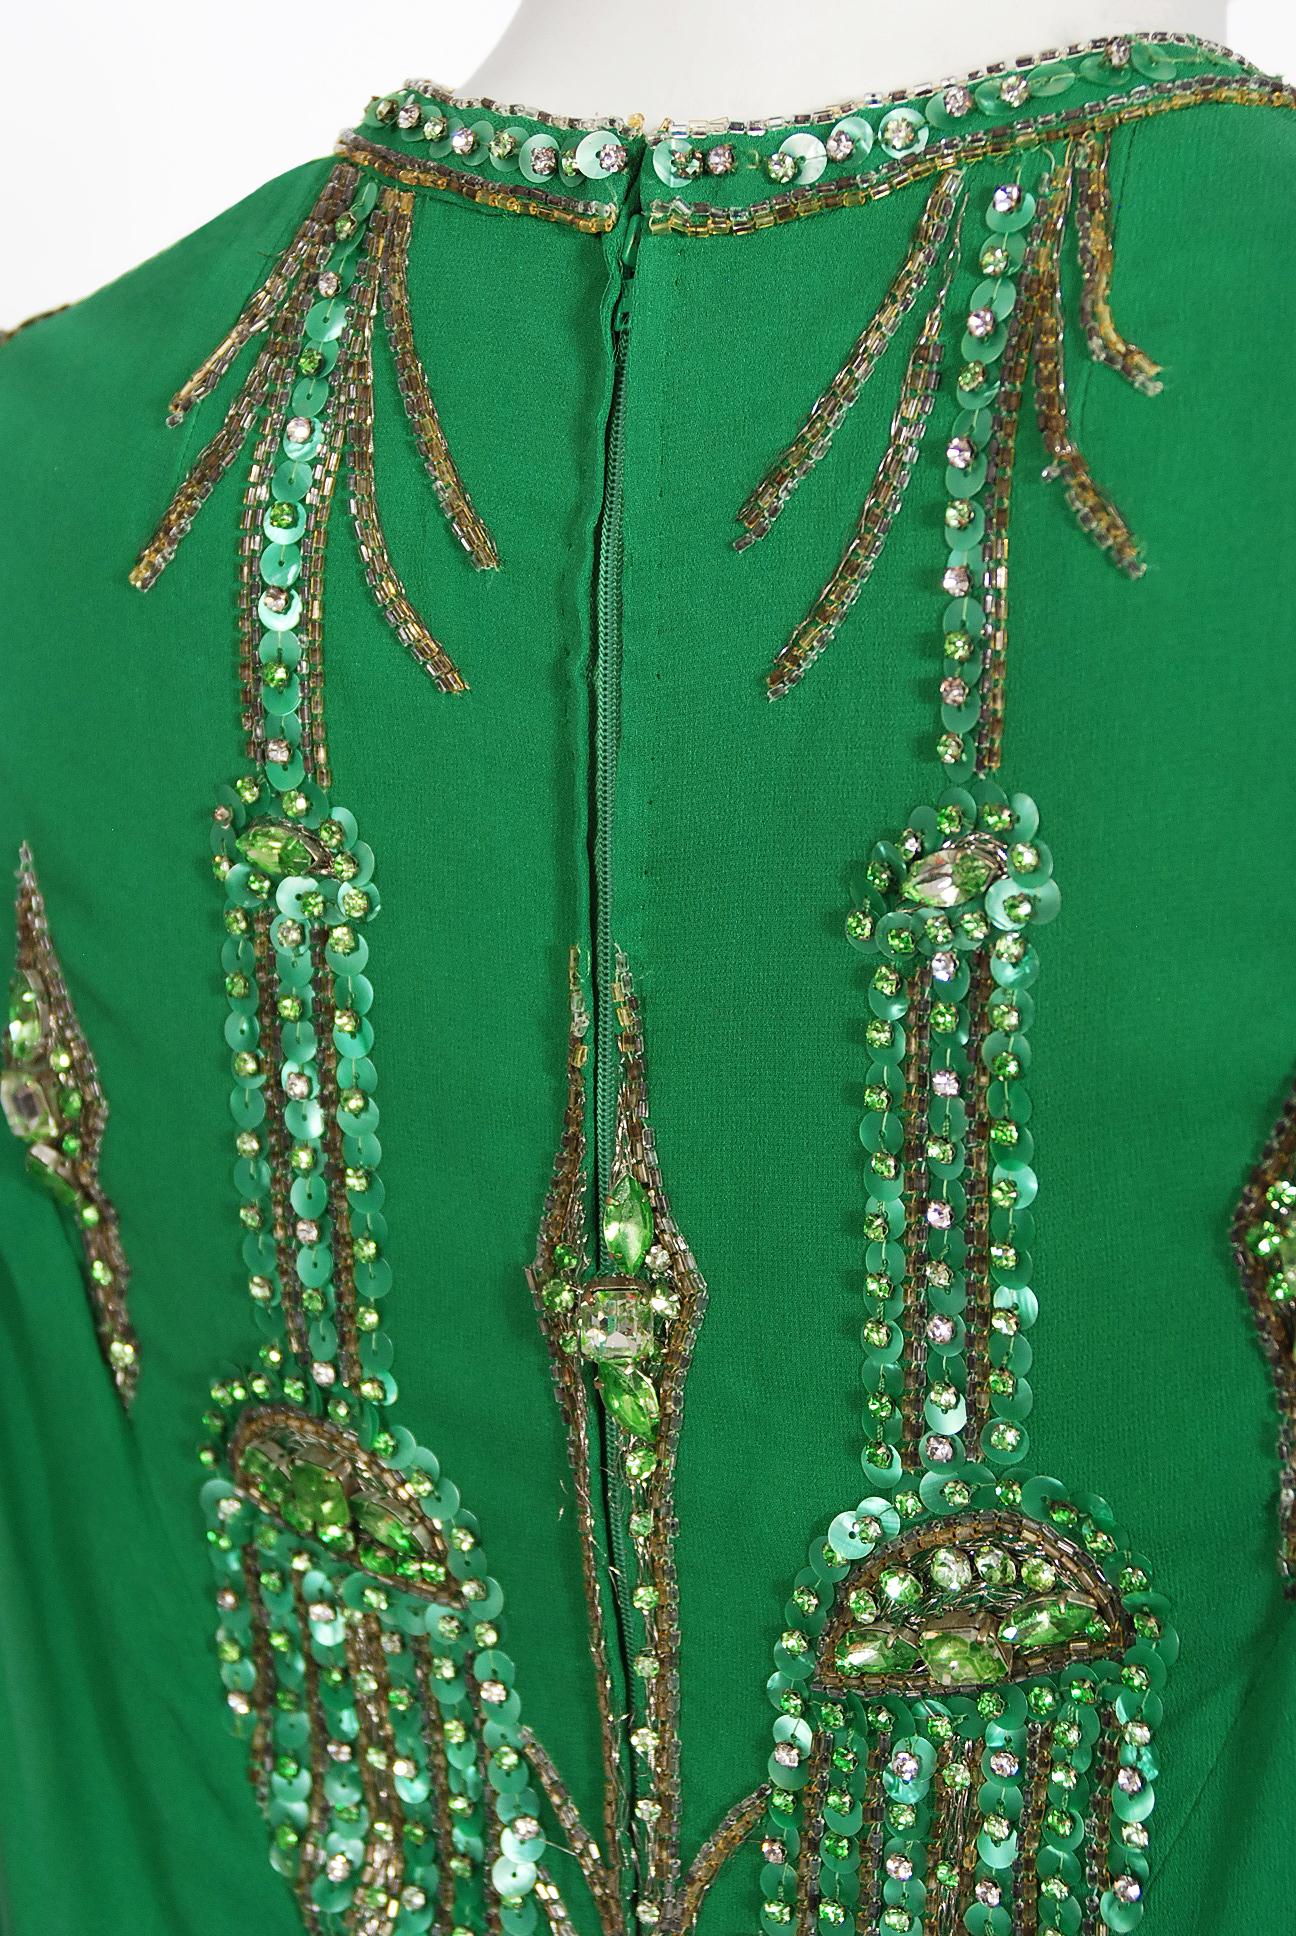 Vintage 1965 Pierre Cardin Haute Couture Beaded Green Silk Chiffon Caftan Gown For Sale 5